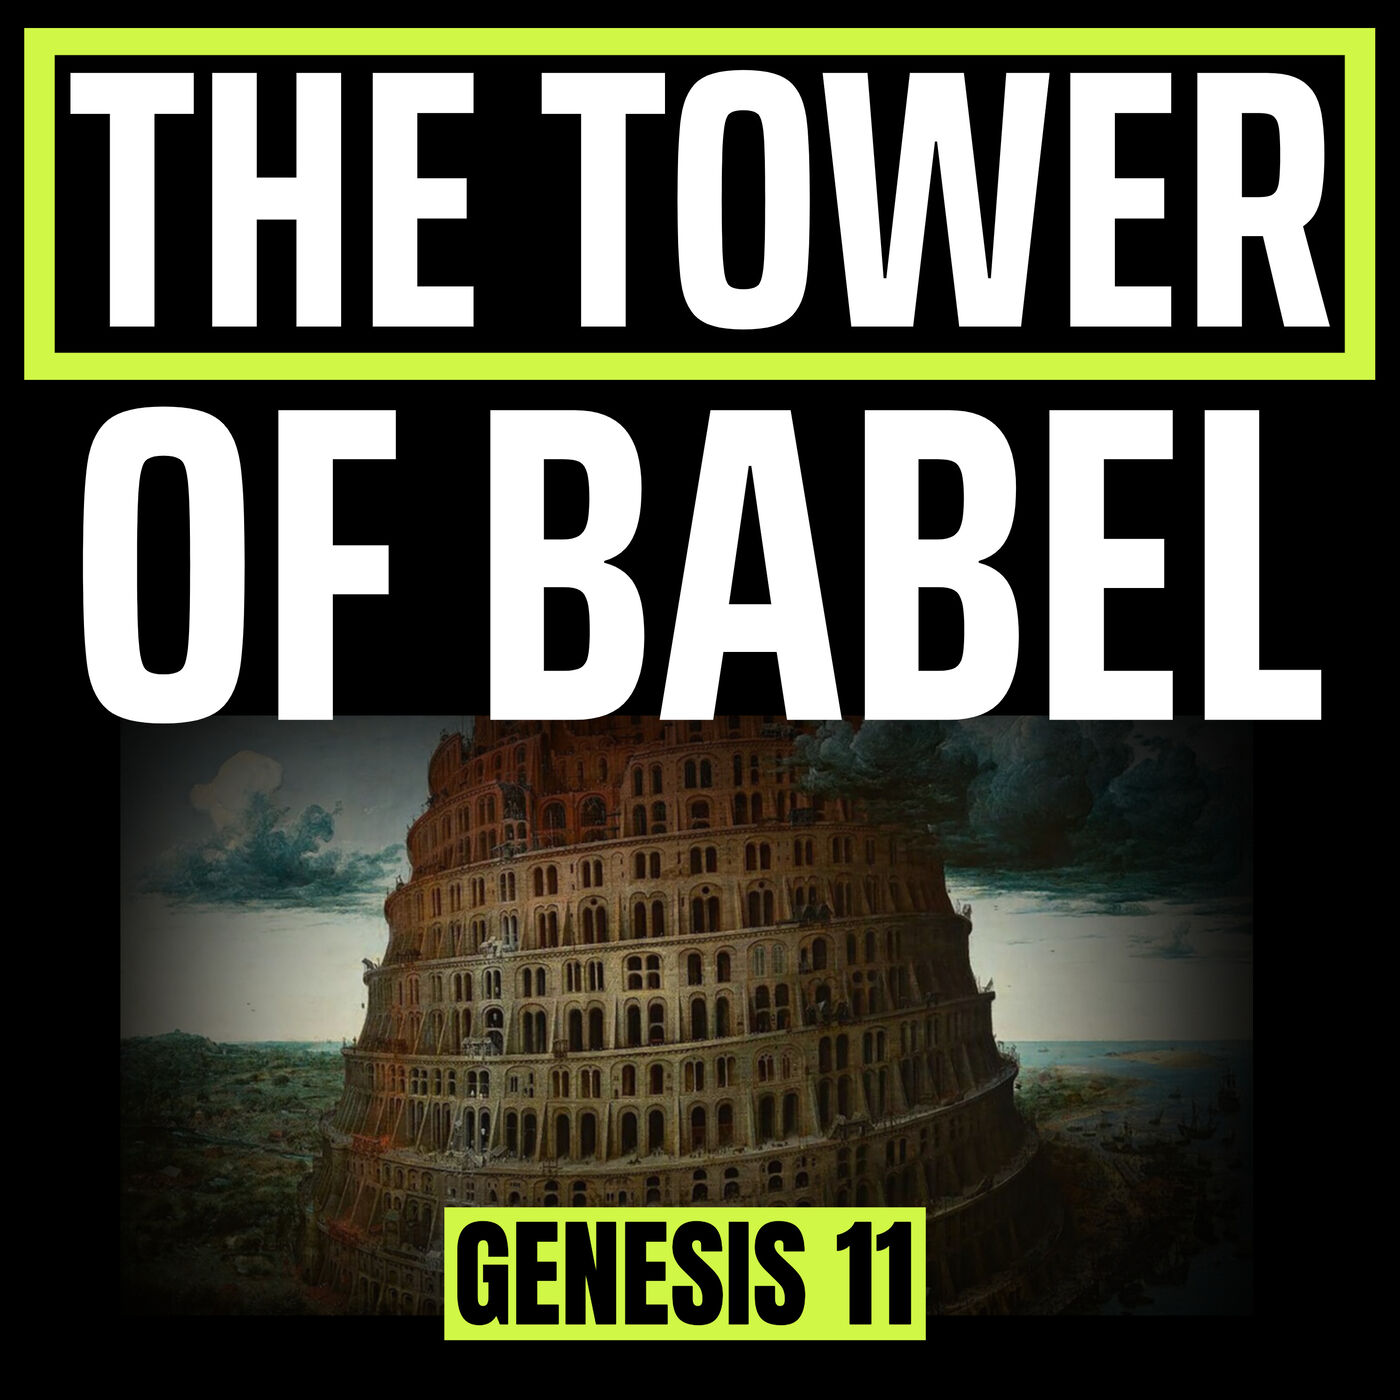 The Tower Of Babel: What Really Happened